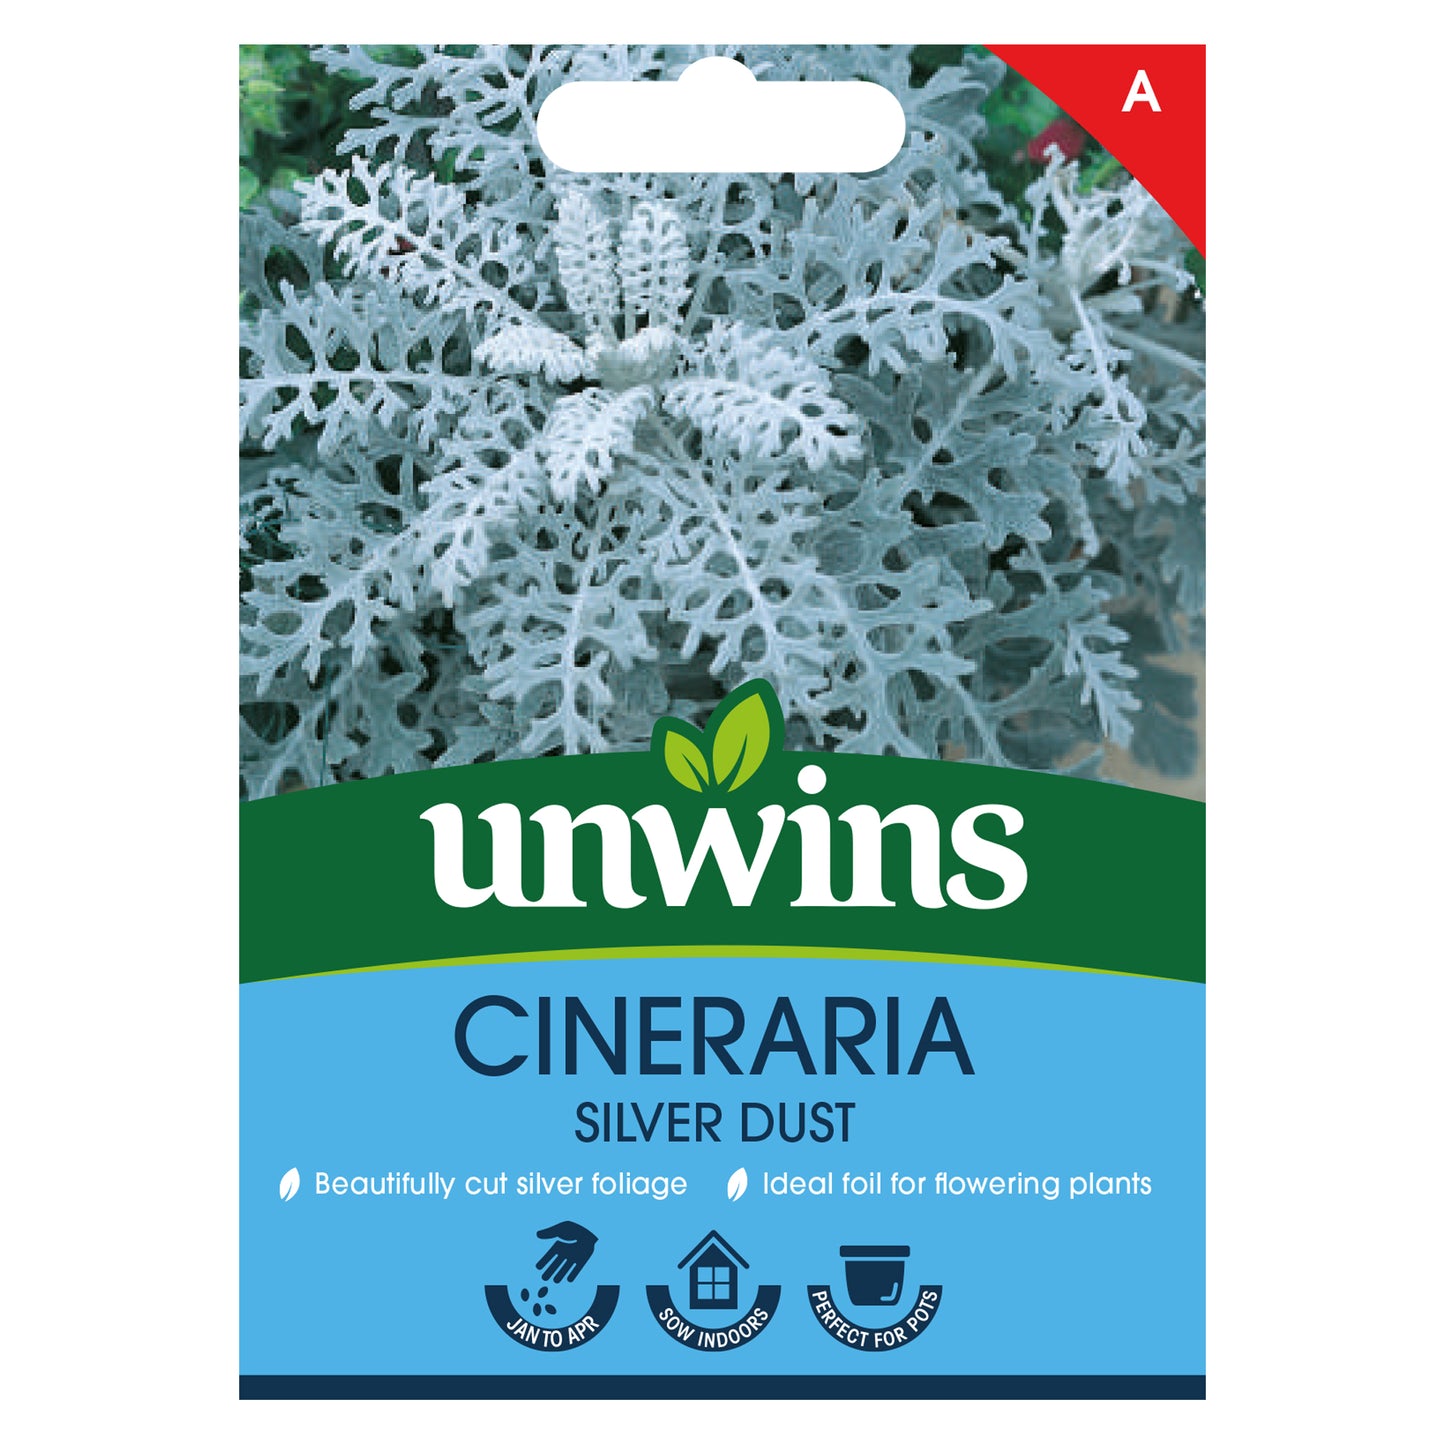 Unwins Cineraria Silver Dust Seeds Front